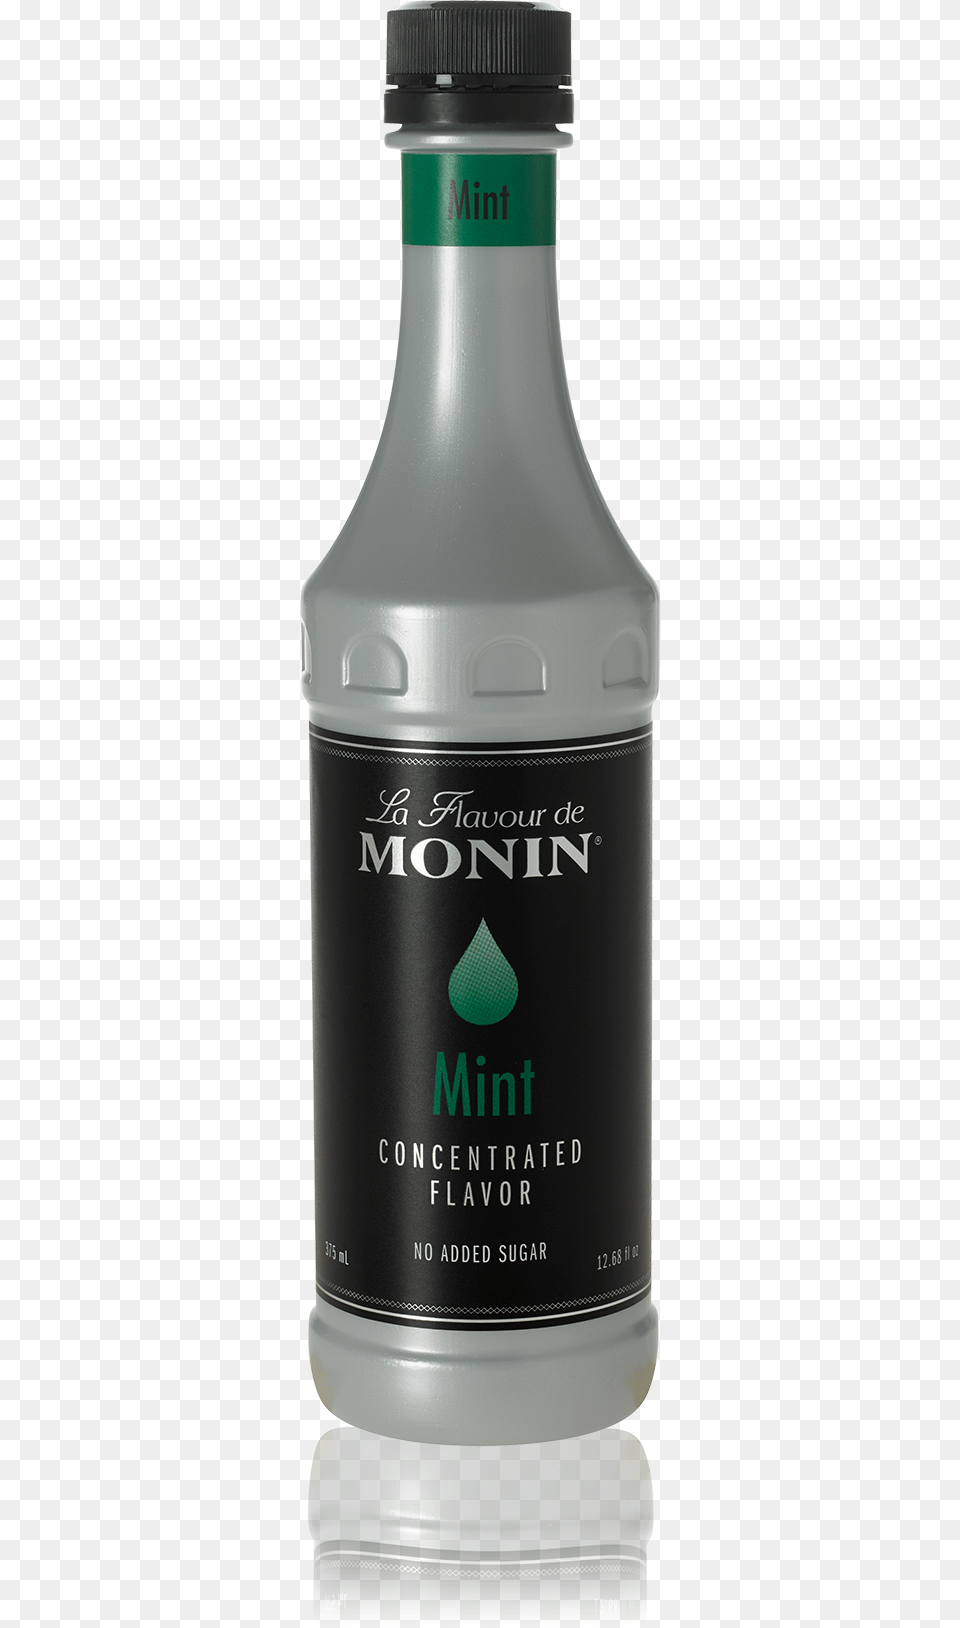 Mint Concentrated Flavor Monin Strawberry Concentrated Flavors, Bottle, Aftershave, Shaker Png